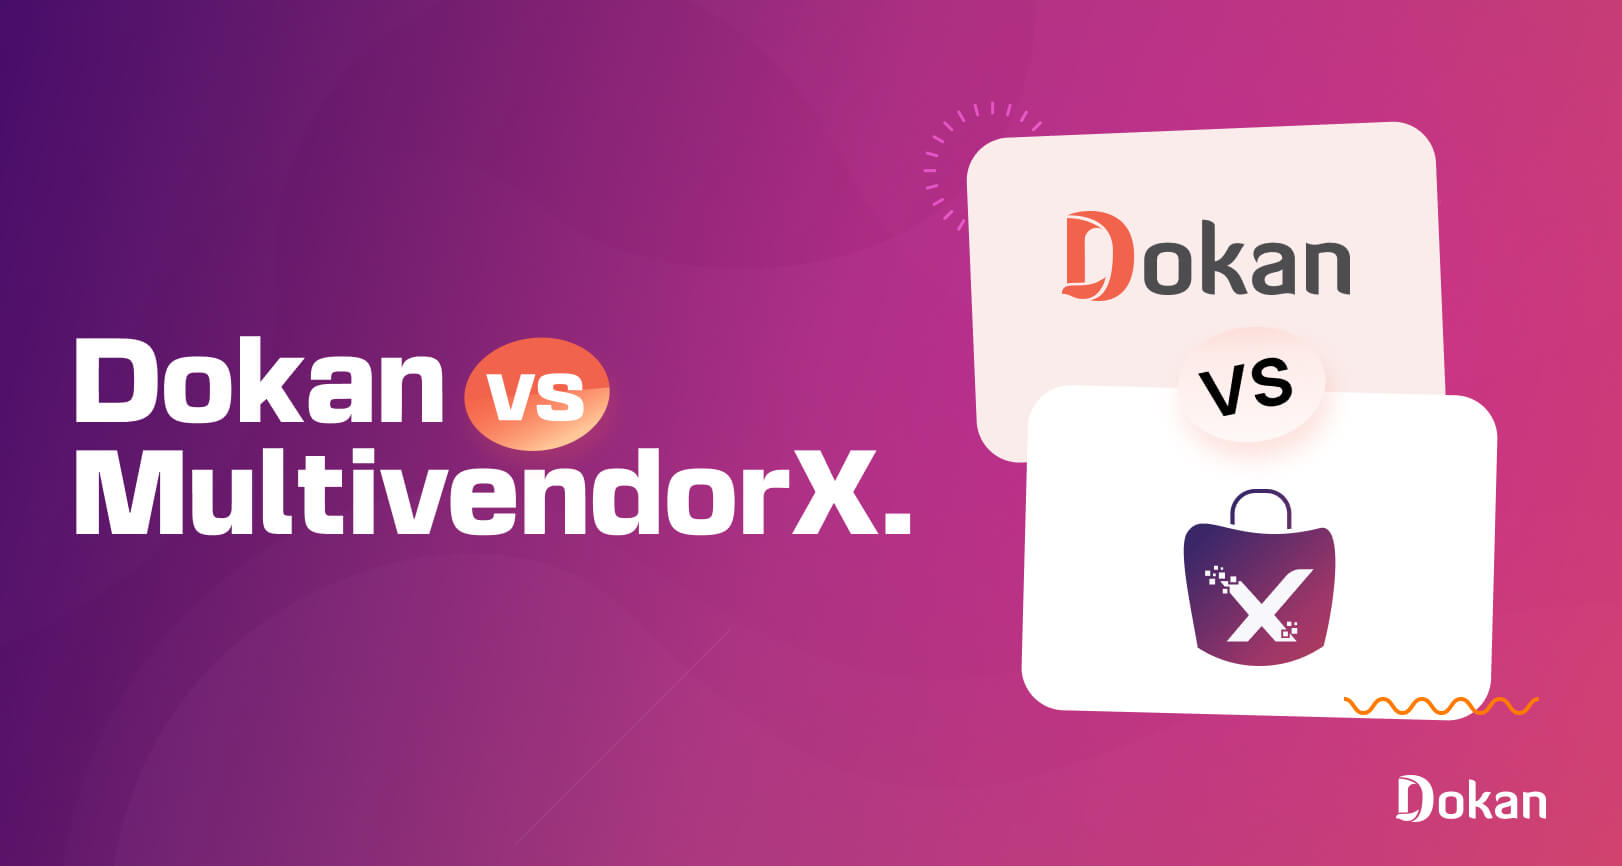 This is the feature image of Dokan Multivendor vs MultivendorX